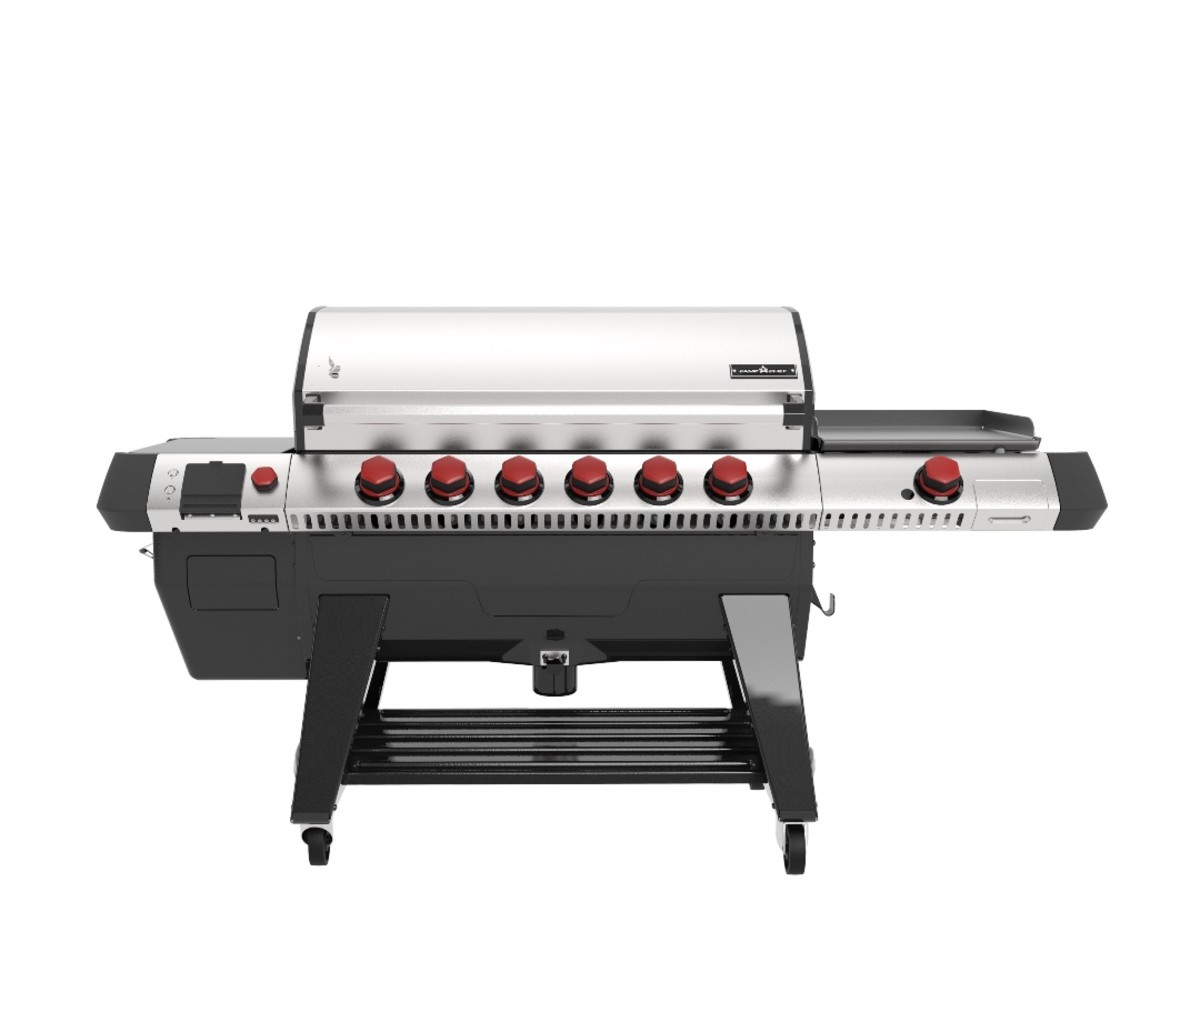 Take grilling with pellets to the next level with the new Camp Chef Apex grill.